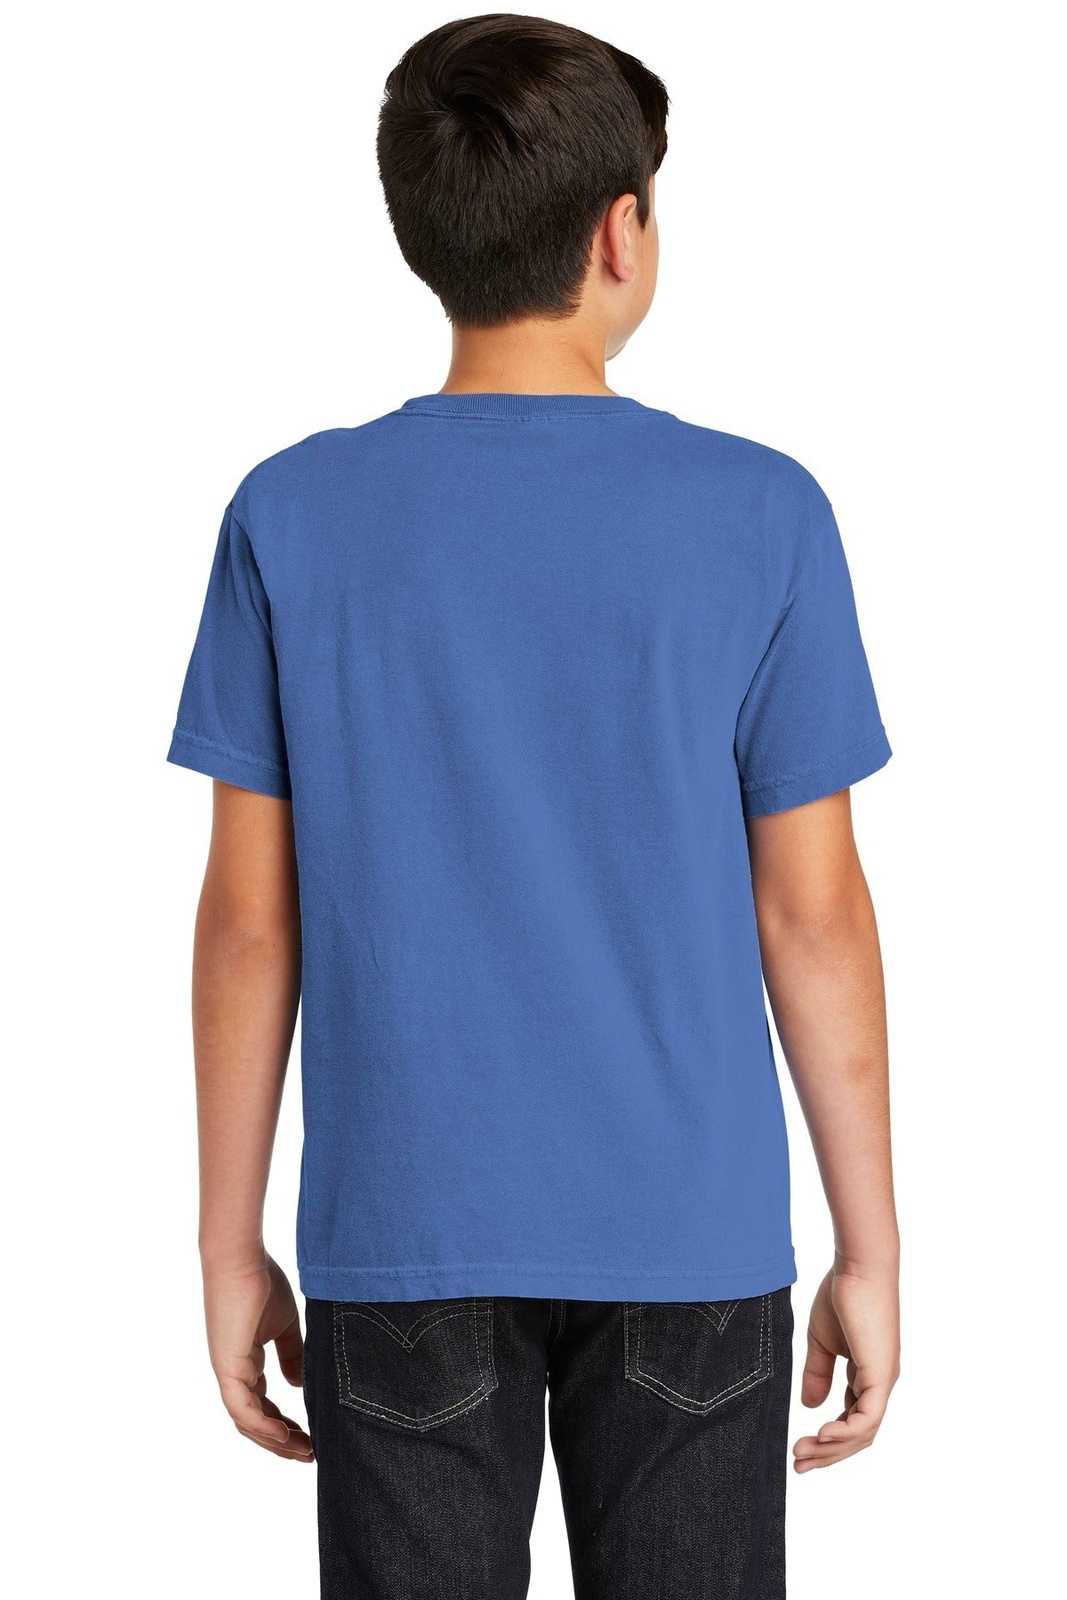 Comfort Colors 9018 Youth Midweight Ring Spun Tee - Flo Blue - HIT a Double